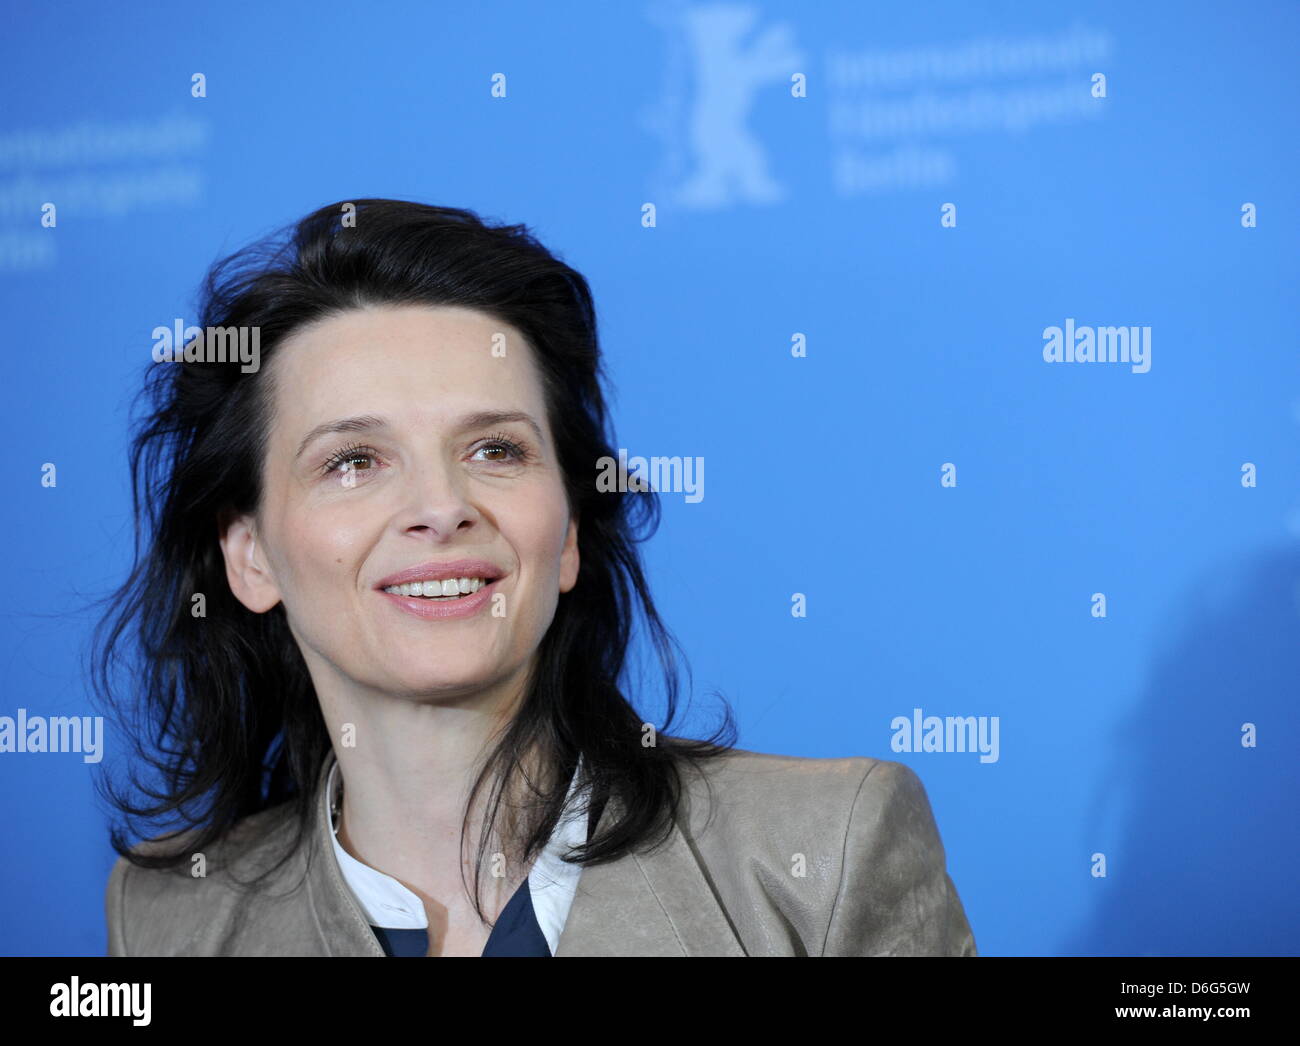 French actress Juliette Binoche poses at a photocall for the movie  Elles  during the 62nd Berlin International Film Festival, in Berlin, Germany, 10 February 2012. The movie is presented in the section Panorama Special at the 62nd Berlinale running from 09 to 19 February. Photo: Angelika Warmuth dpa Stock Photo